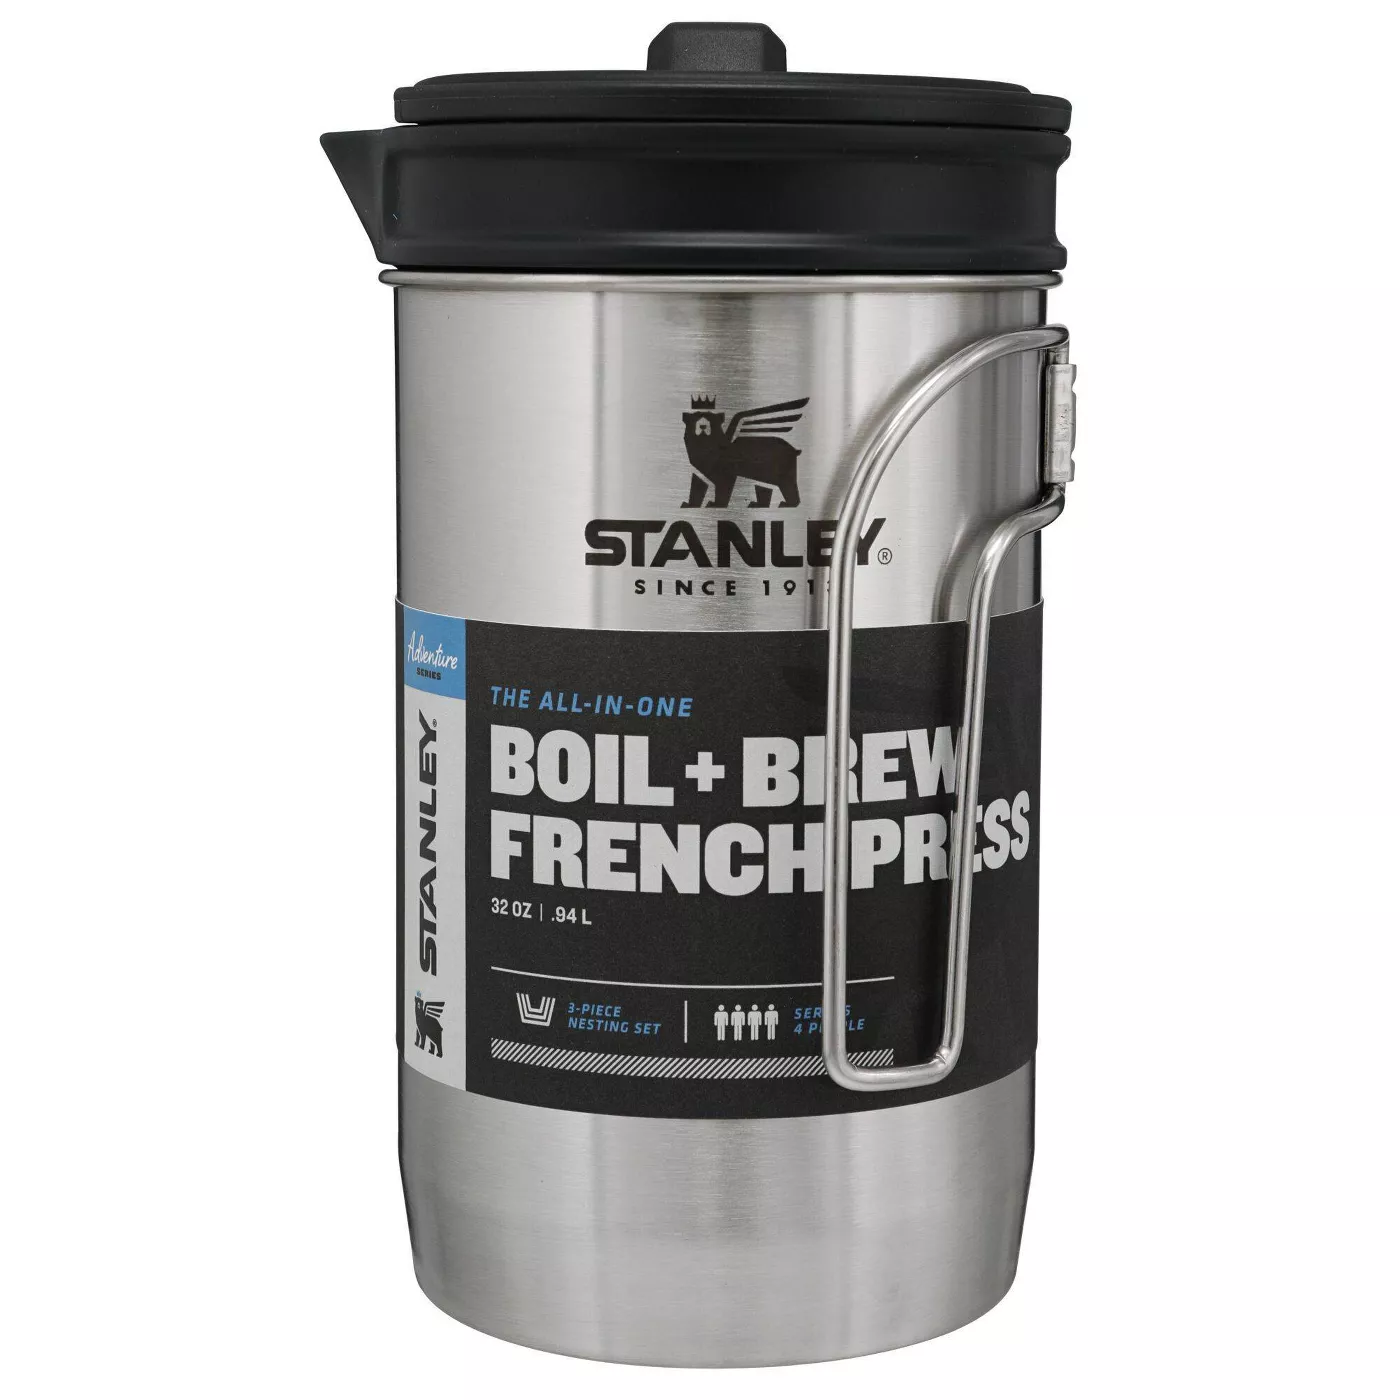 Boil & Brew French Press Coffee Maker - image 4 of 6